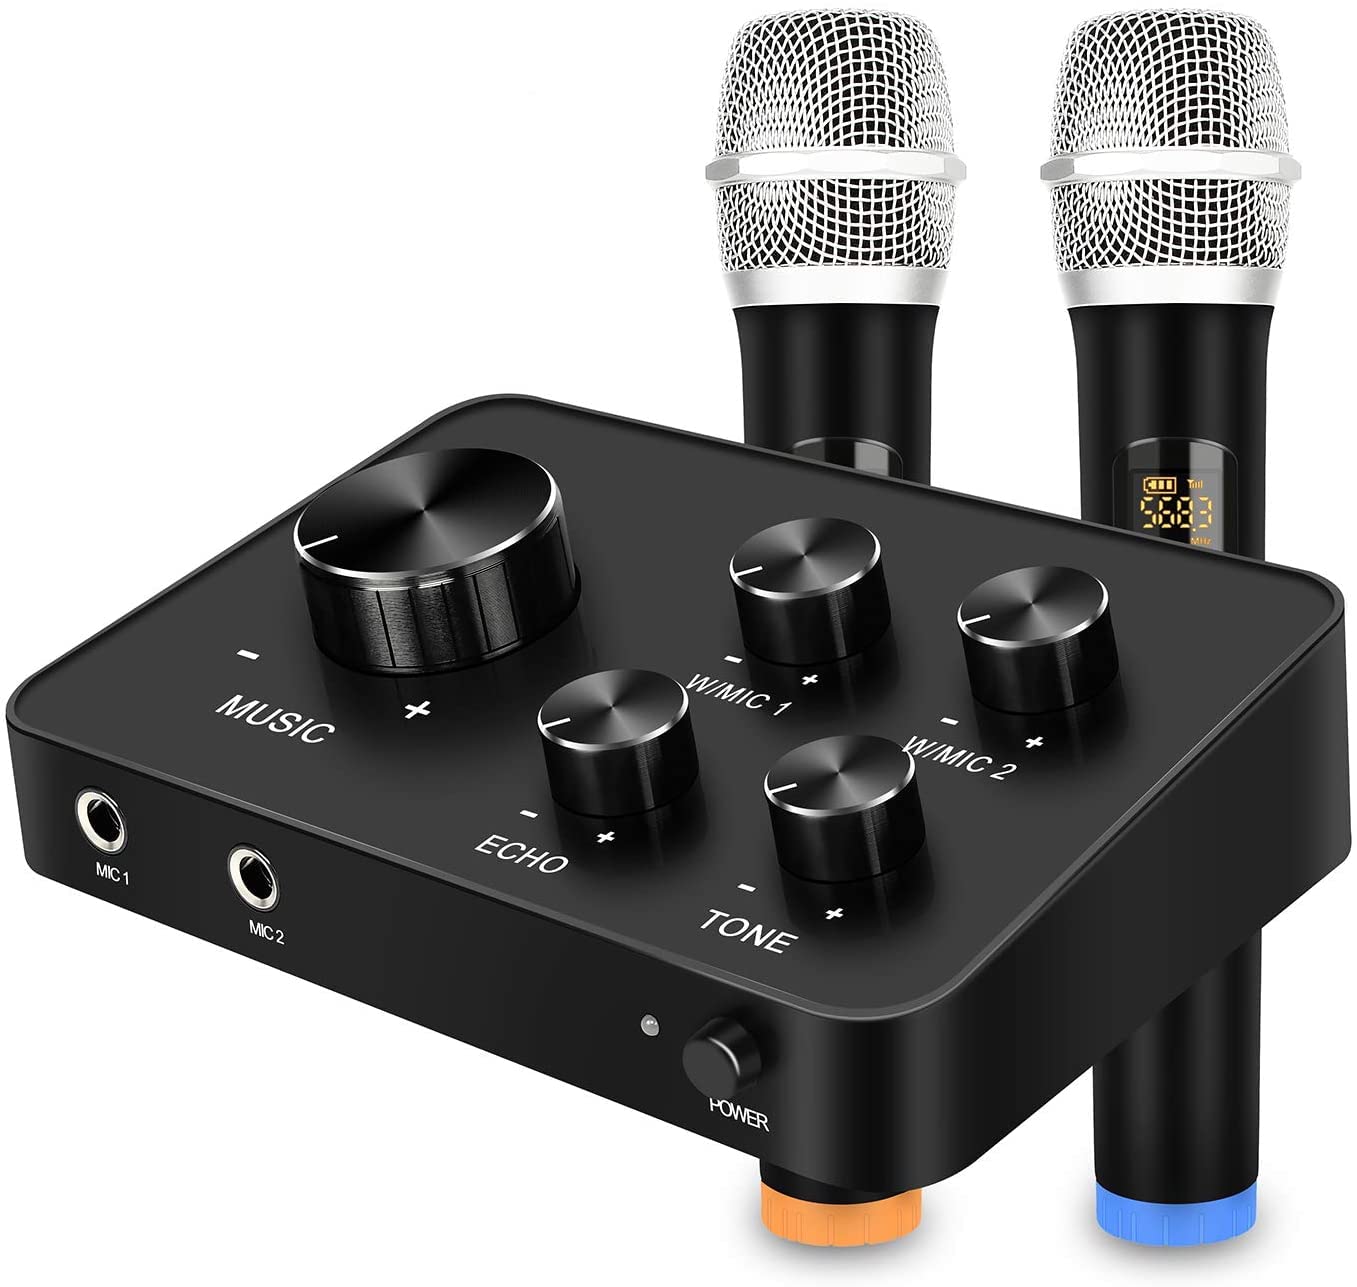 Portable Karaoke Microphone Mixer System Set, with Dual UHF Wireless M